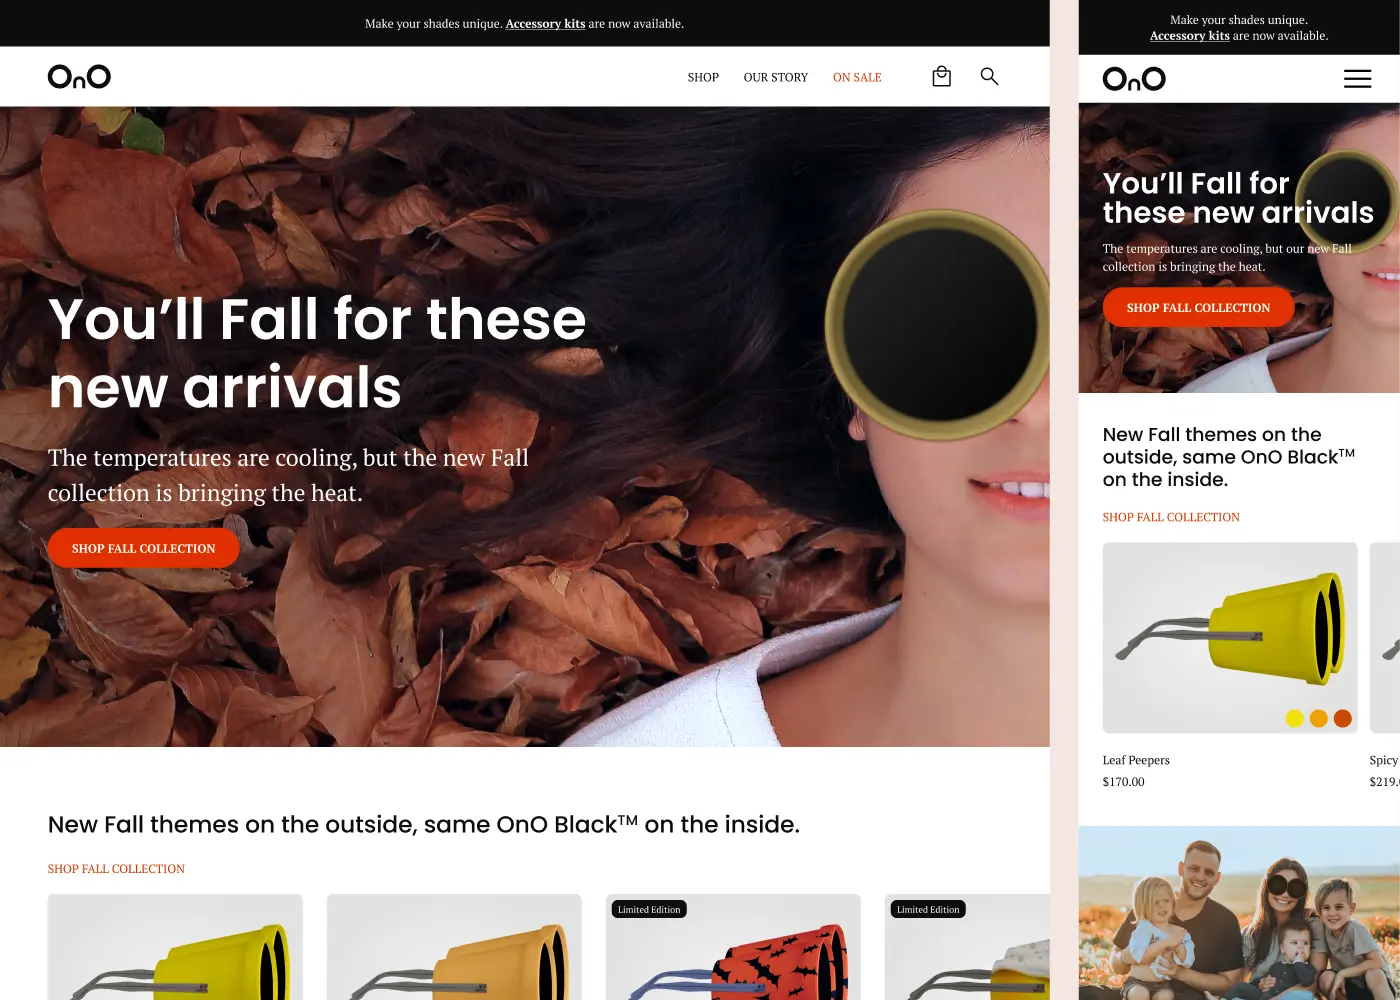 Screenshot of homepage showing woman wearing product while lying in Fall leaves.